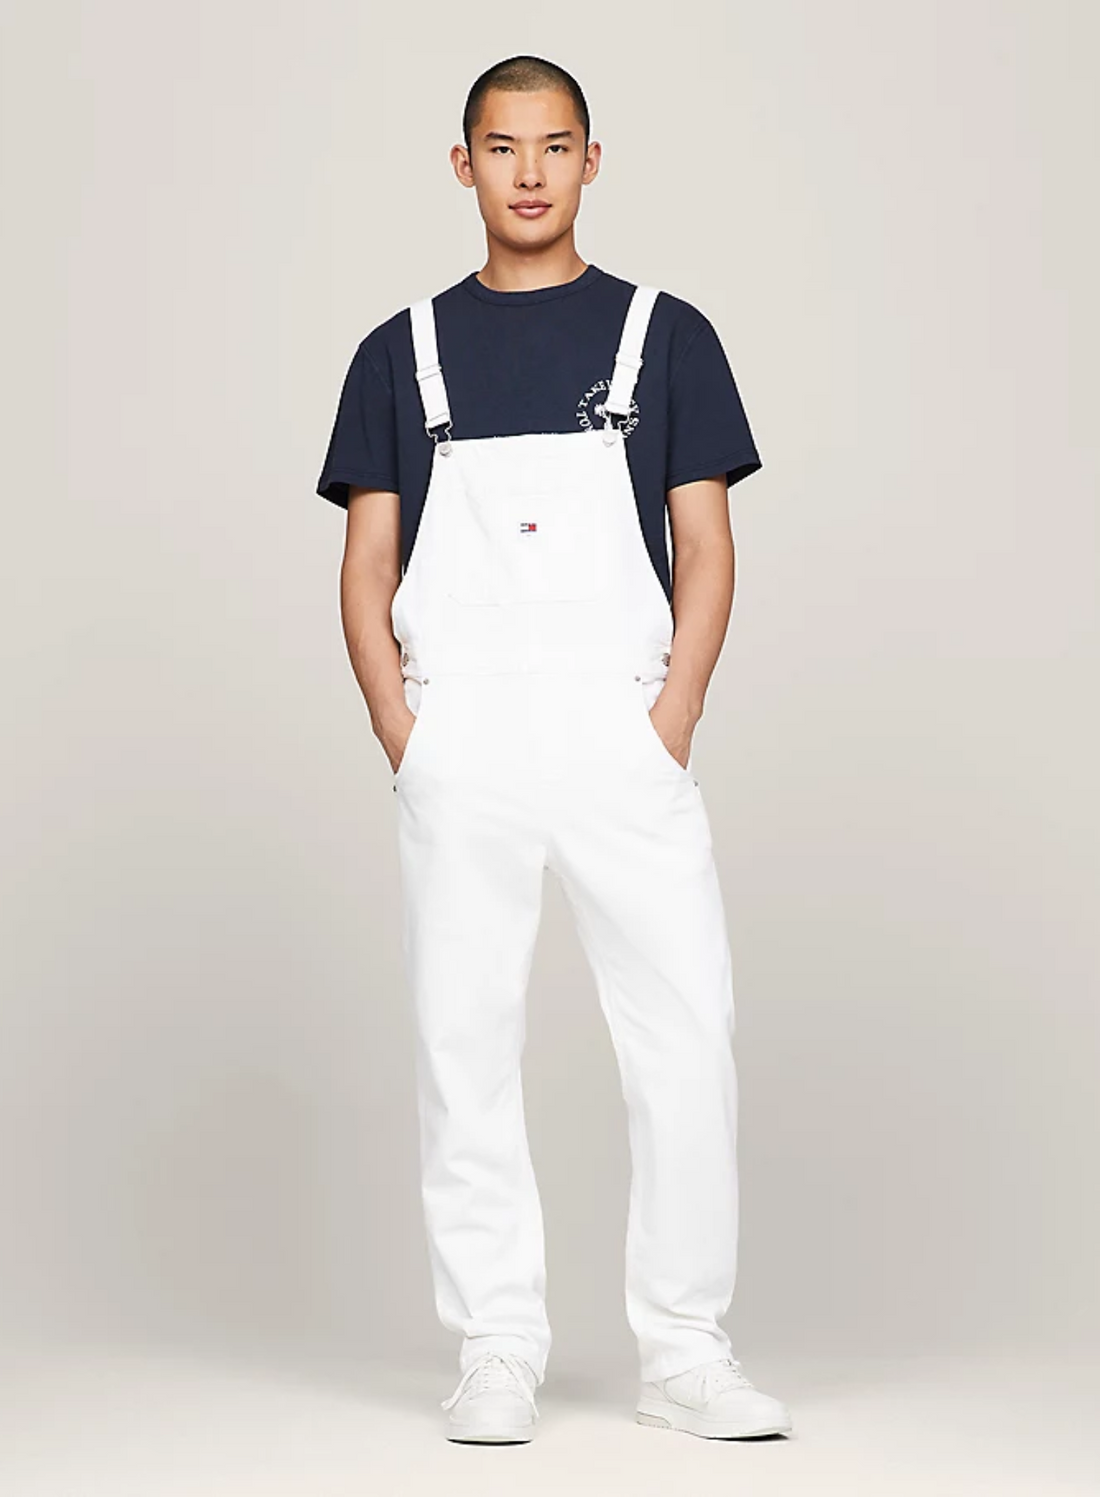 Tommy Jeans TJM Ethan Dungaree White - Hympala Store 